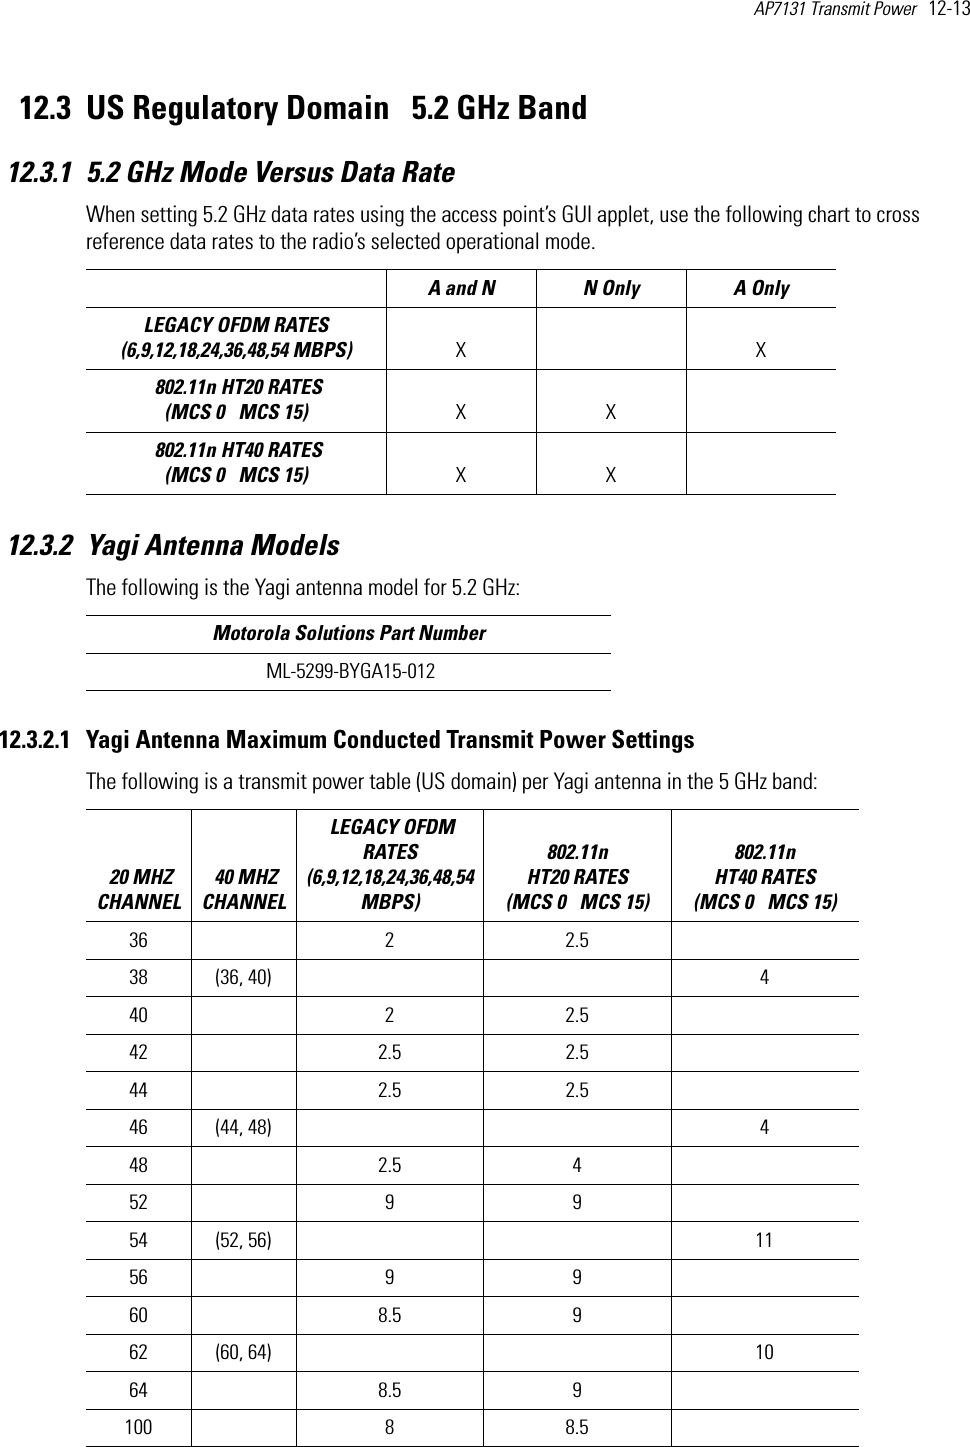 AP7131 Transmit Power   12-13 12.3 US Regulatory Domain   5.2 GHz Band12.3.1 5.2 GHz Mode Versus Data RateWhen setting 5.2 GHz data rates using the access point’s GUI applet, use the following chart to cross reference data rates to the radio’s selected operational mode. 12.3.2 Yagi Antenna ModelsThe following is the Yagi antenna model for 5.2 GHz:12.3.2.1 Yagi Antenna Maximum Conducted Transmit Power SettingsThe following is a transmit power table (US domain) per Yagi antenna in the 5 GHz band:  A and N  N Only  A Only LEGACY OFDM RATES (6,9,12,18,24,36,48,54 MBPS) XX 802.11n HT20 RATES (MCS 0   MCS 15) XX 802.11n HT40 RATES (MCS 0   MCS 15)  XXMotorola Solutions Part Number ML-5299-BYGA15-012 20 MHZ CHANNEL 40 MHZ CHANNEL LEGACY OFDM RATES (6,9,12,18,24,36,48,54 MBPS) 802.11n HT20 RATES (MCS 0   MCS 15)802.11n HT40 RATES (MCS 0   MCS 15) 36  2 2.5  38 (36, 40)     440  2 2.5  42  2.5 2.5  44  2.5 2.5  46 (44, 48)     448  2.5 4  52  9 9  54 (52, 56)     1156  9 9  60  8.5 9  62 (60, 64)     1064  8.5 9  100  8 8.5  